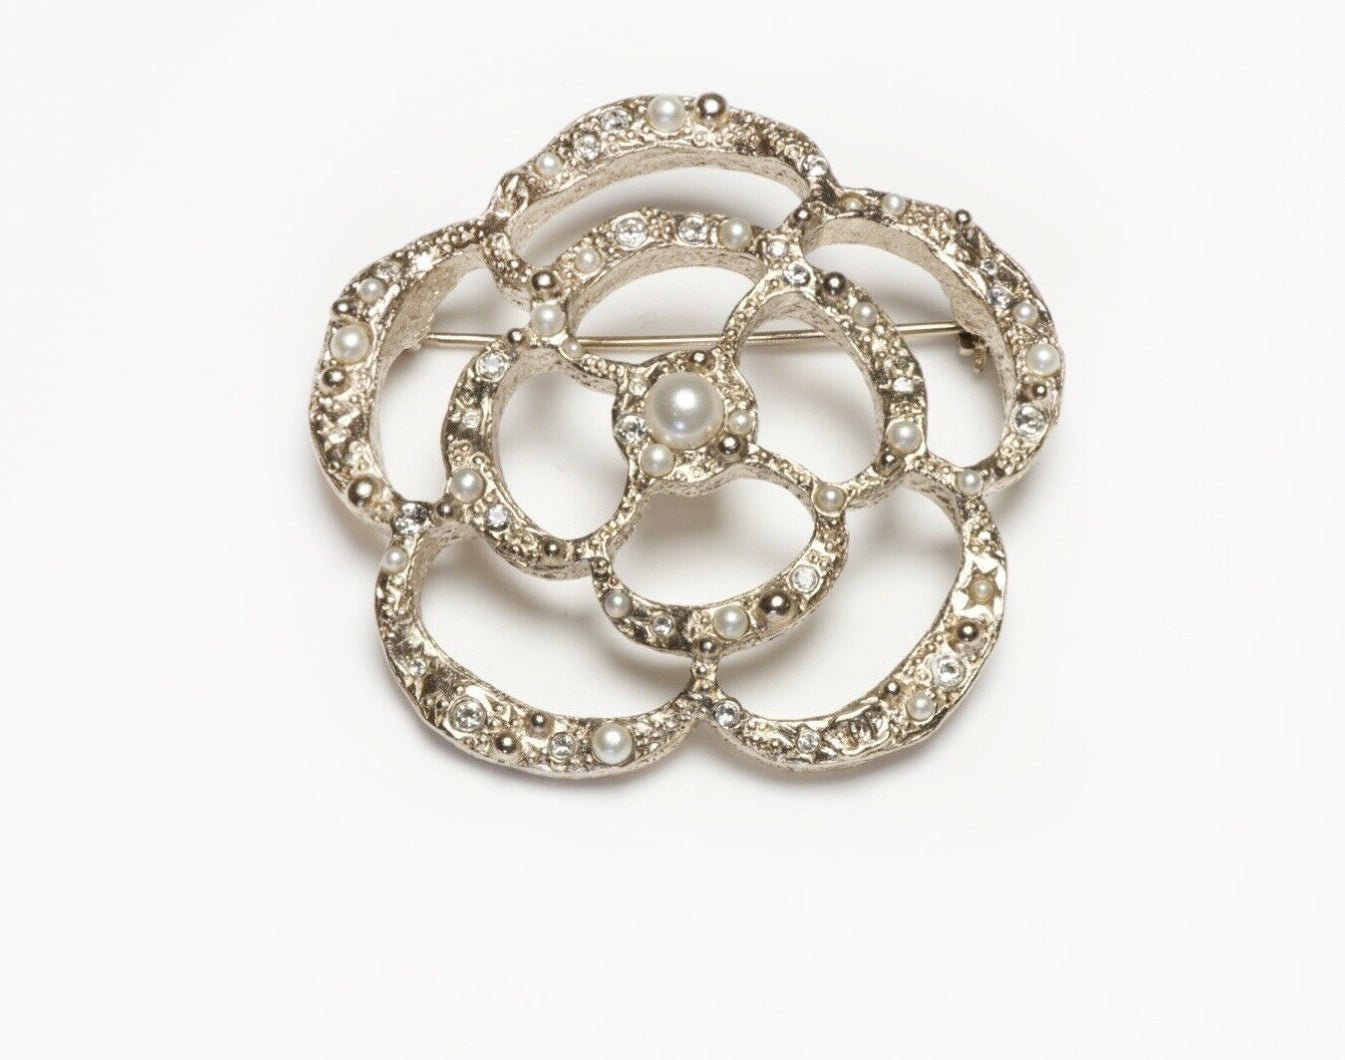 CHANEL Paris Spring 2013 Faux Pearl Camellia Flower Brooch